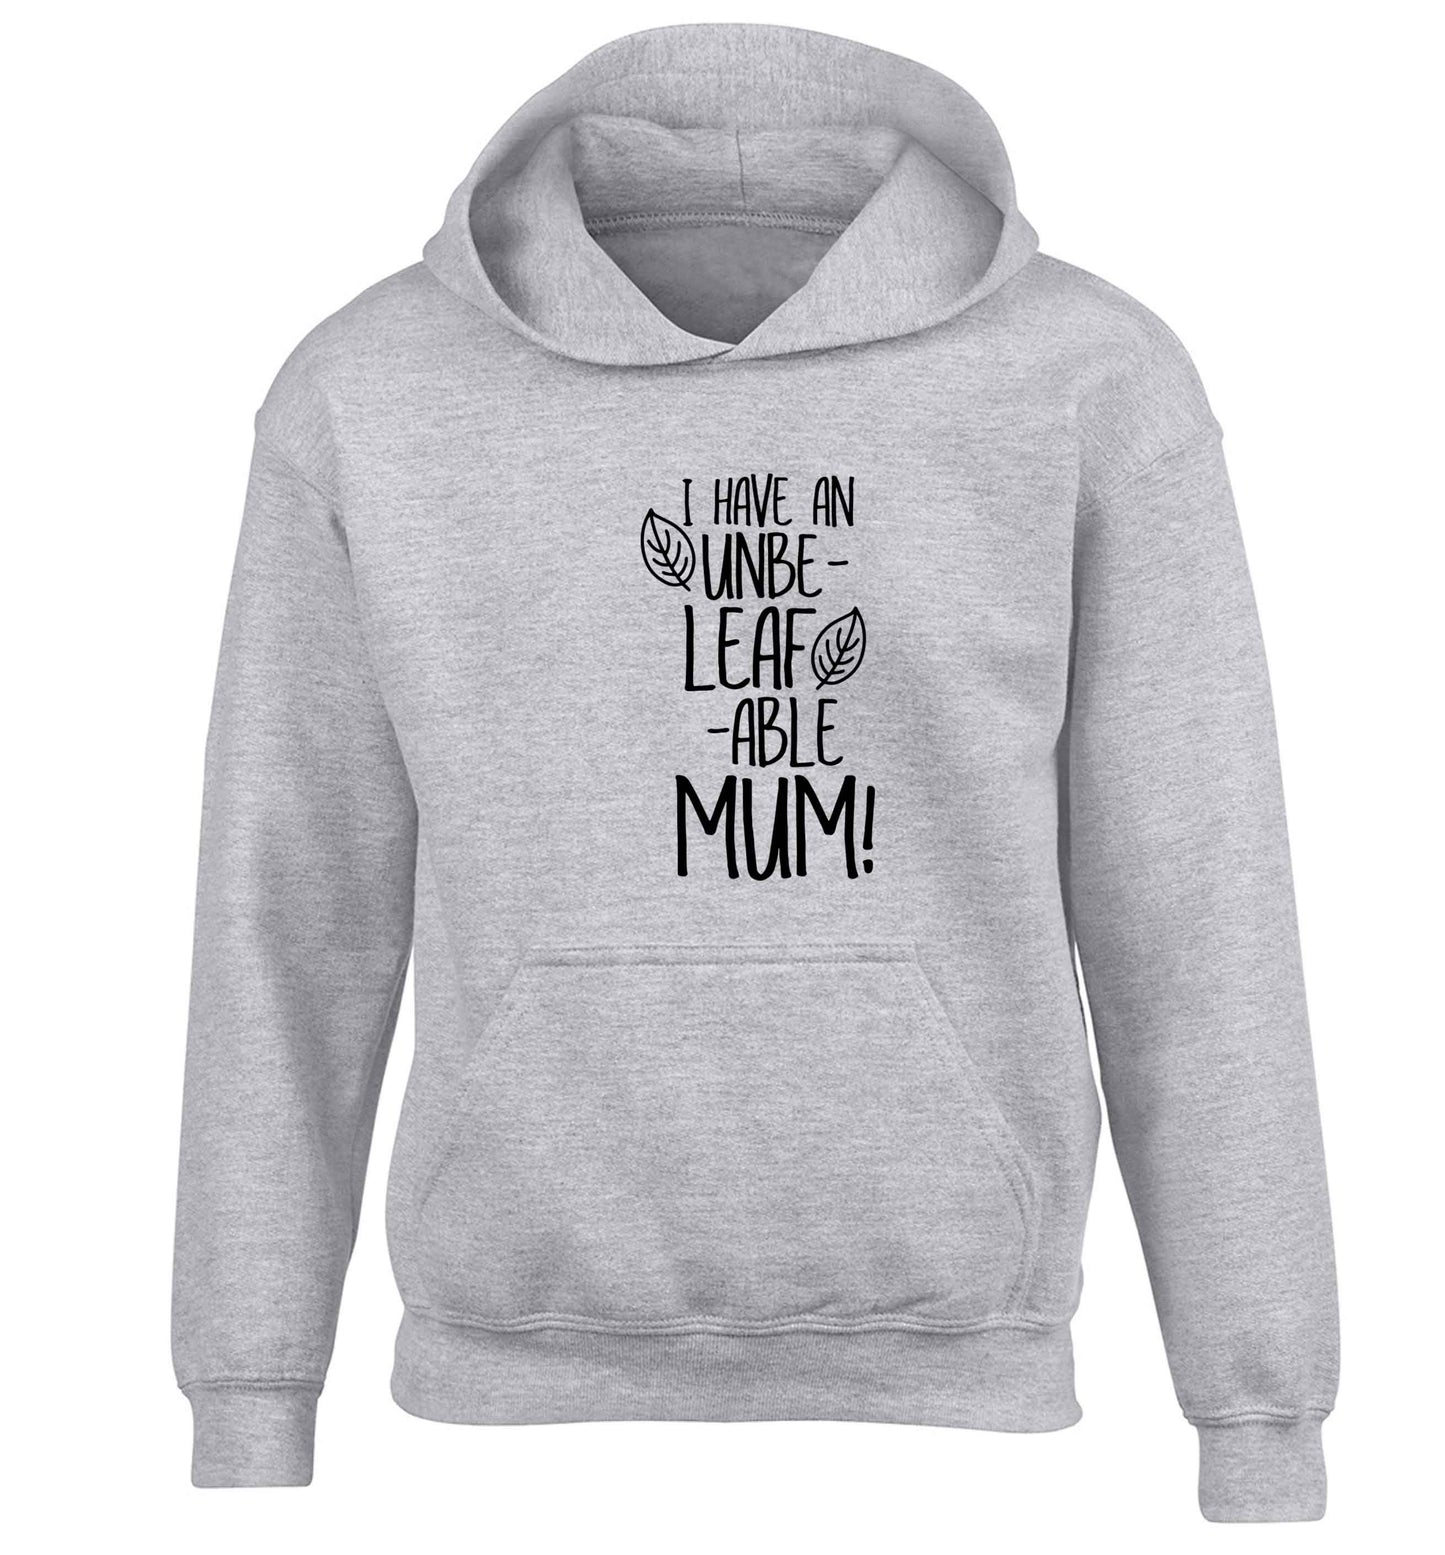 I have an unbeleafable mum! children's grey hoodie 12-13 Years